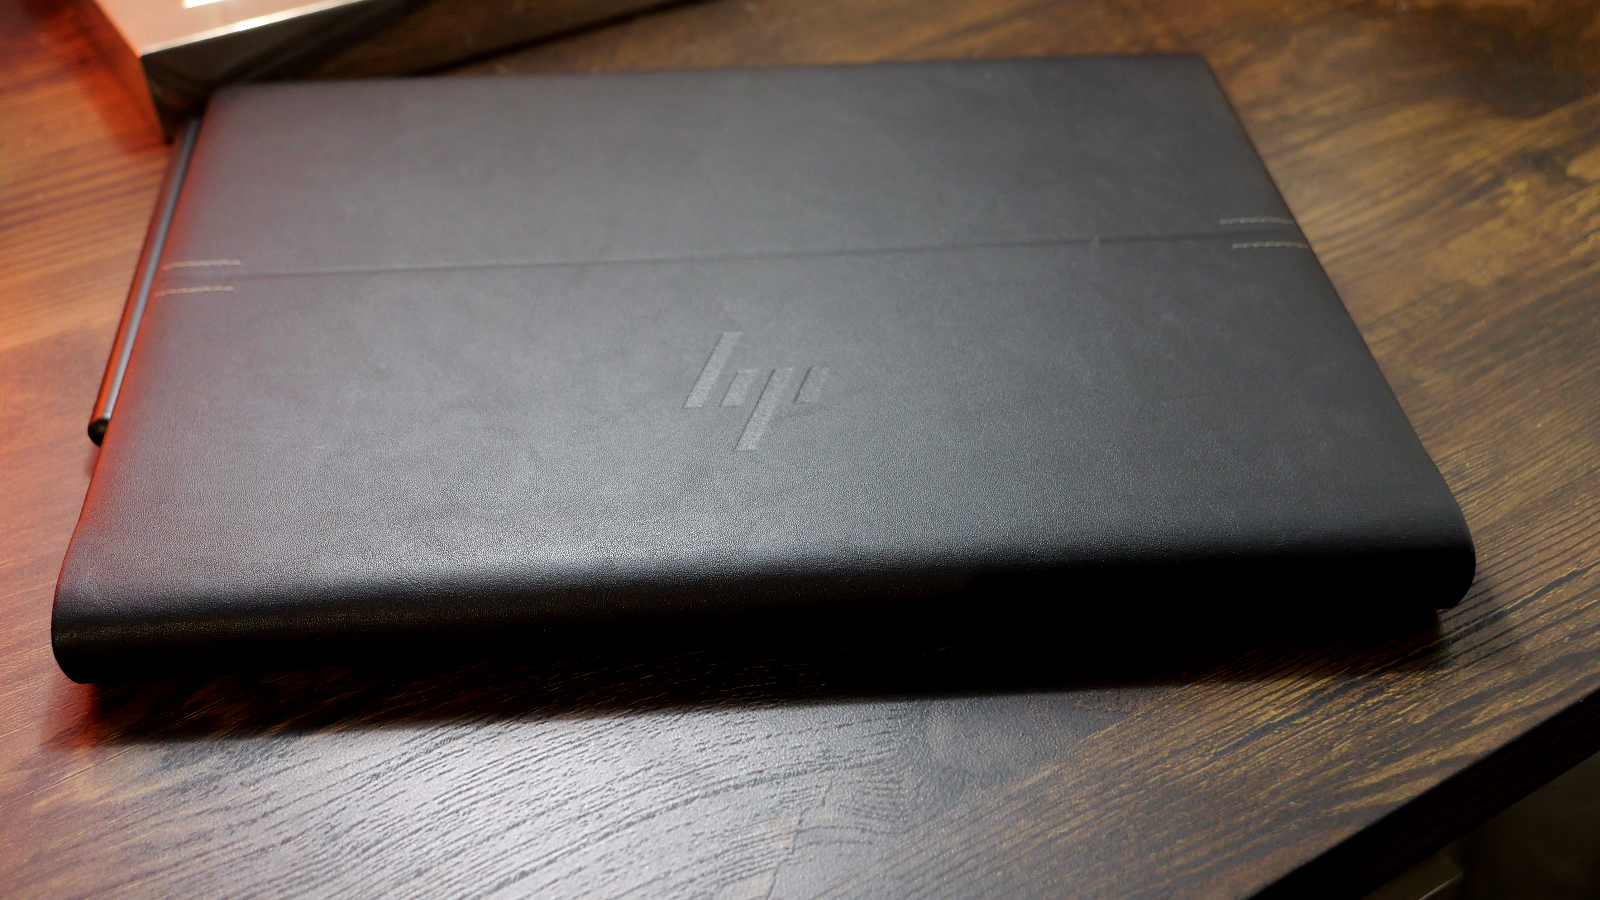 HP Dragonfly Folio G3: The luxurious business hybrid 2-in-1